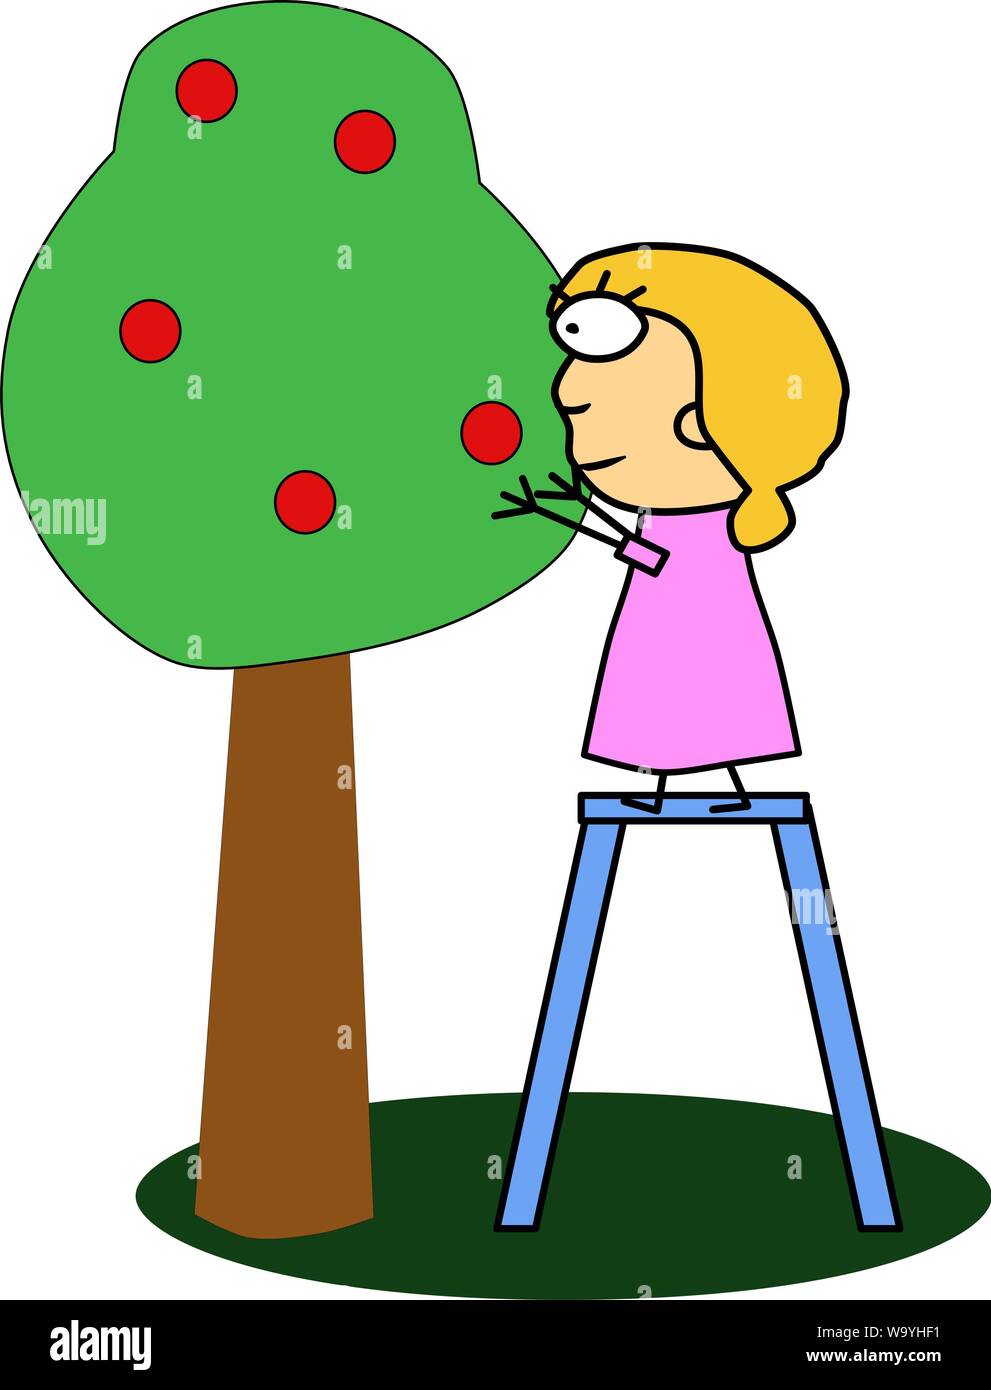 The girl is harvesting in garden. A tree with ripe fruits. Illustration of red fruit on the tree. Stock Vector